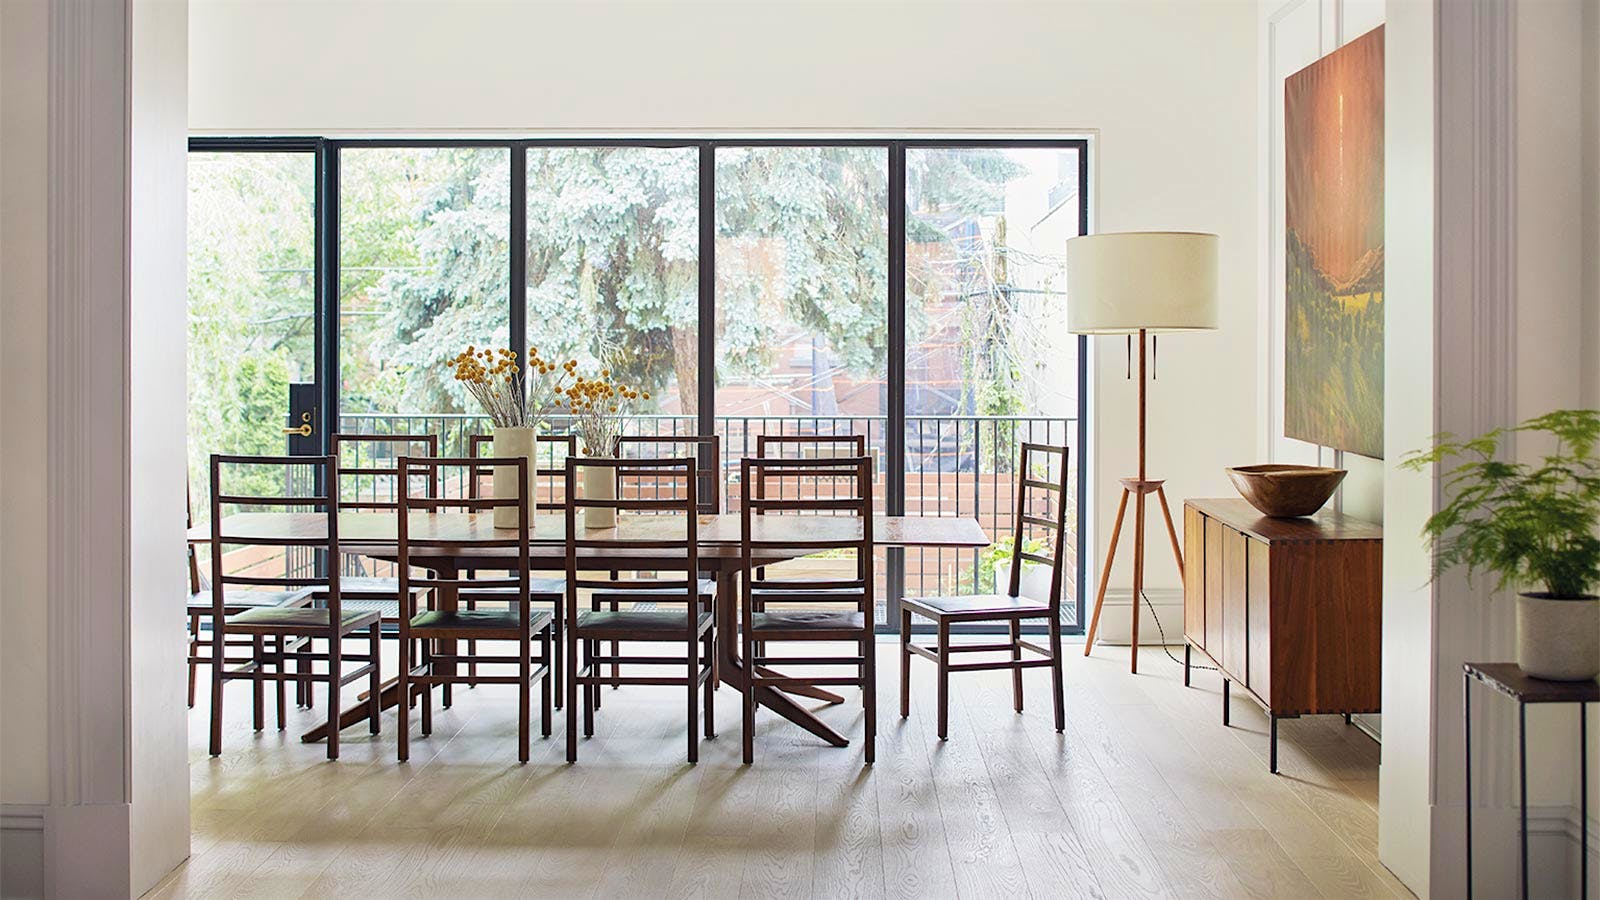 Light-filled dining room, with table in front of floor-to-ceiling windows. Photo by Ty Cole